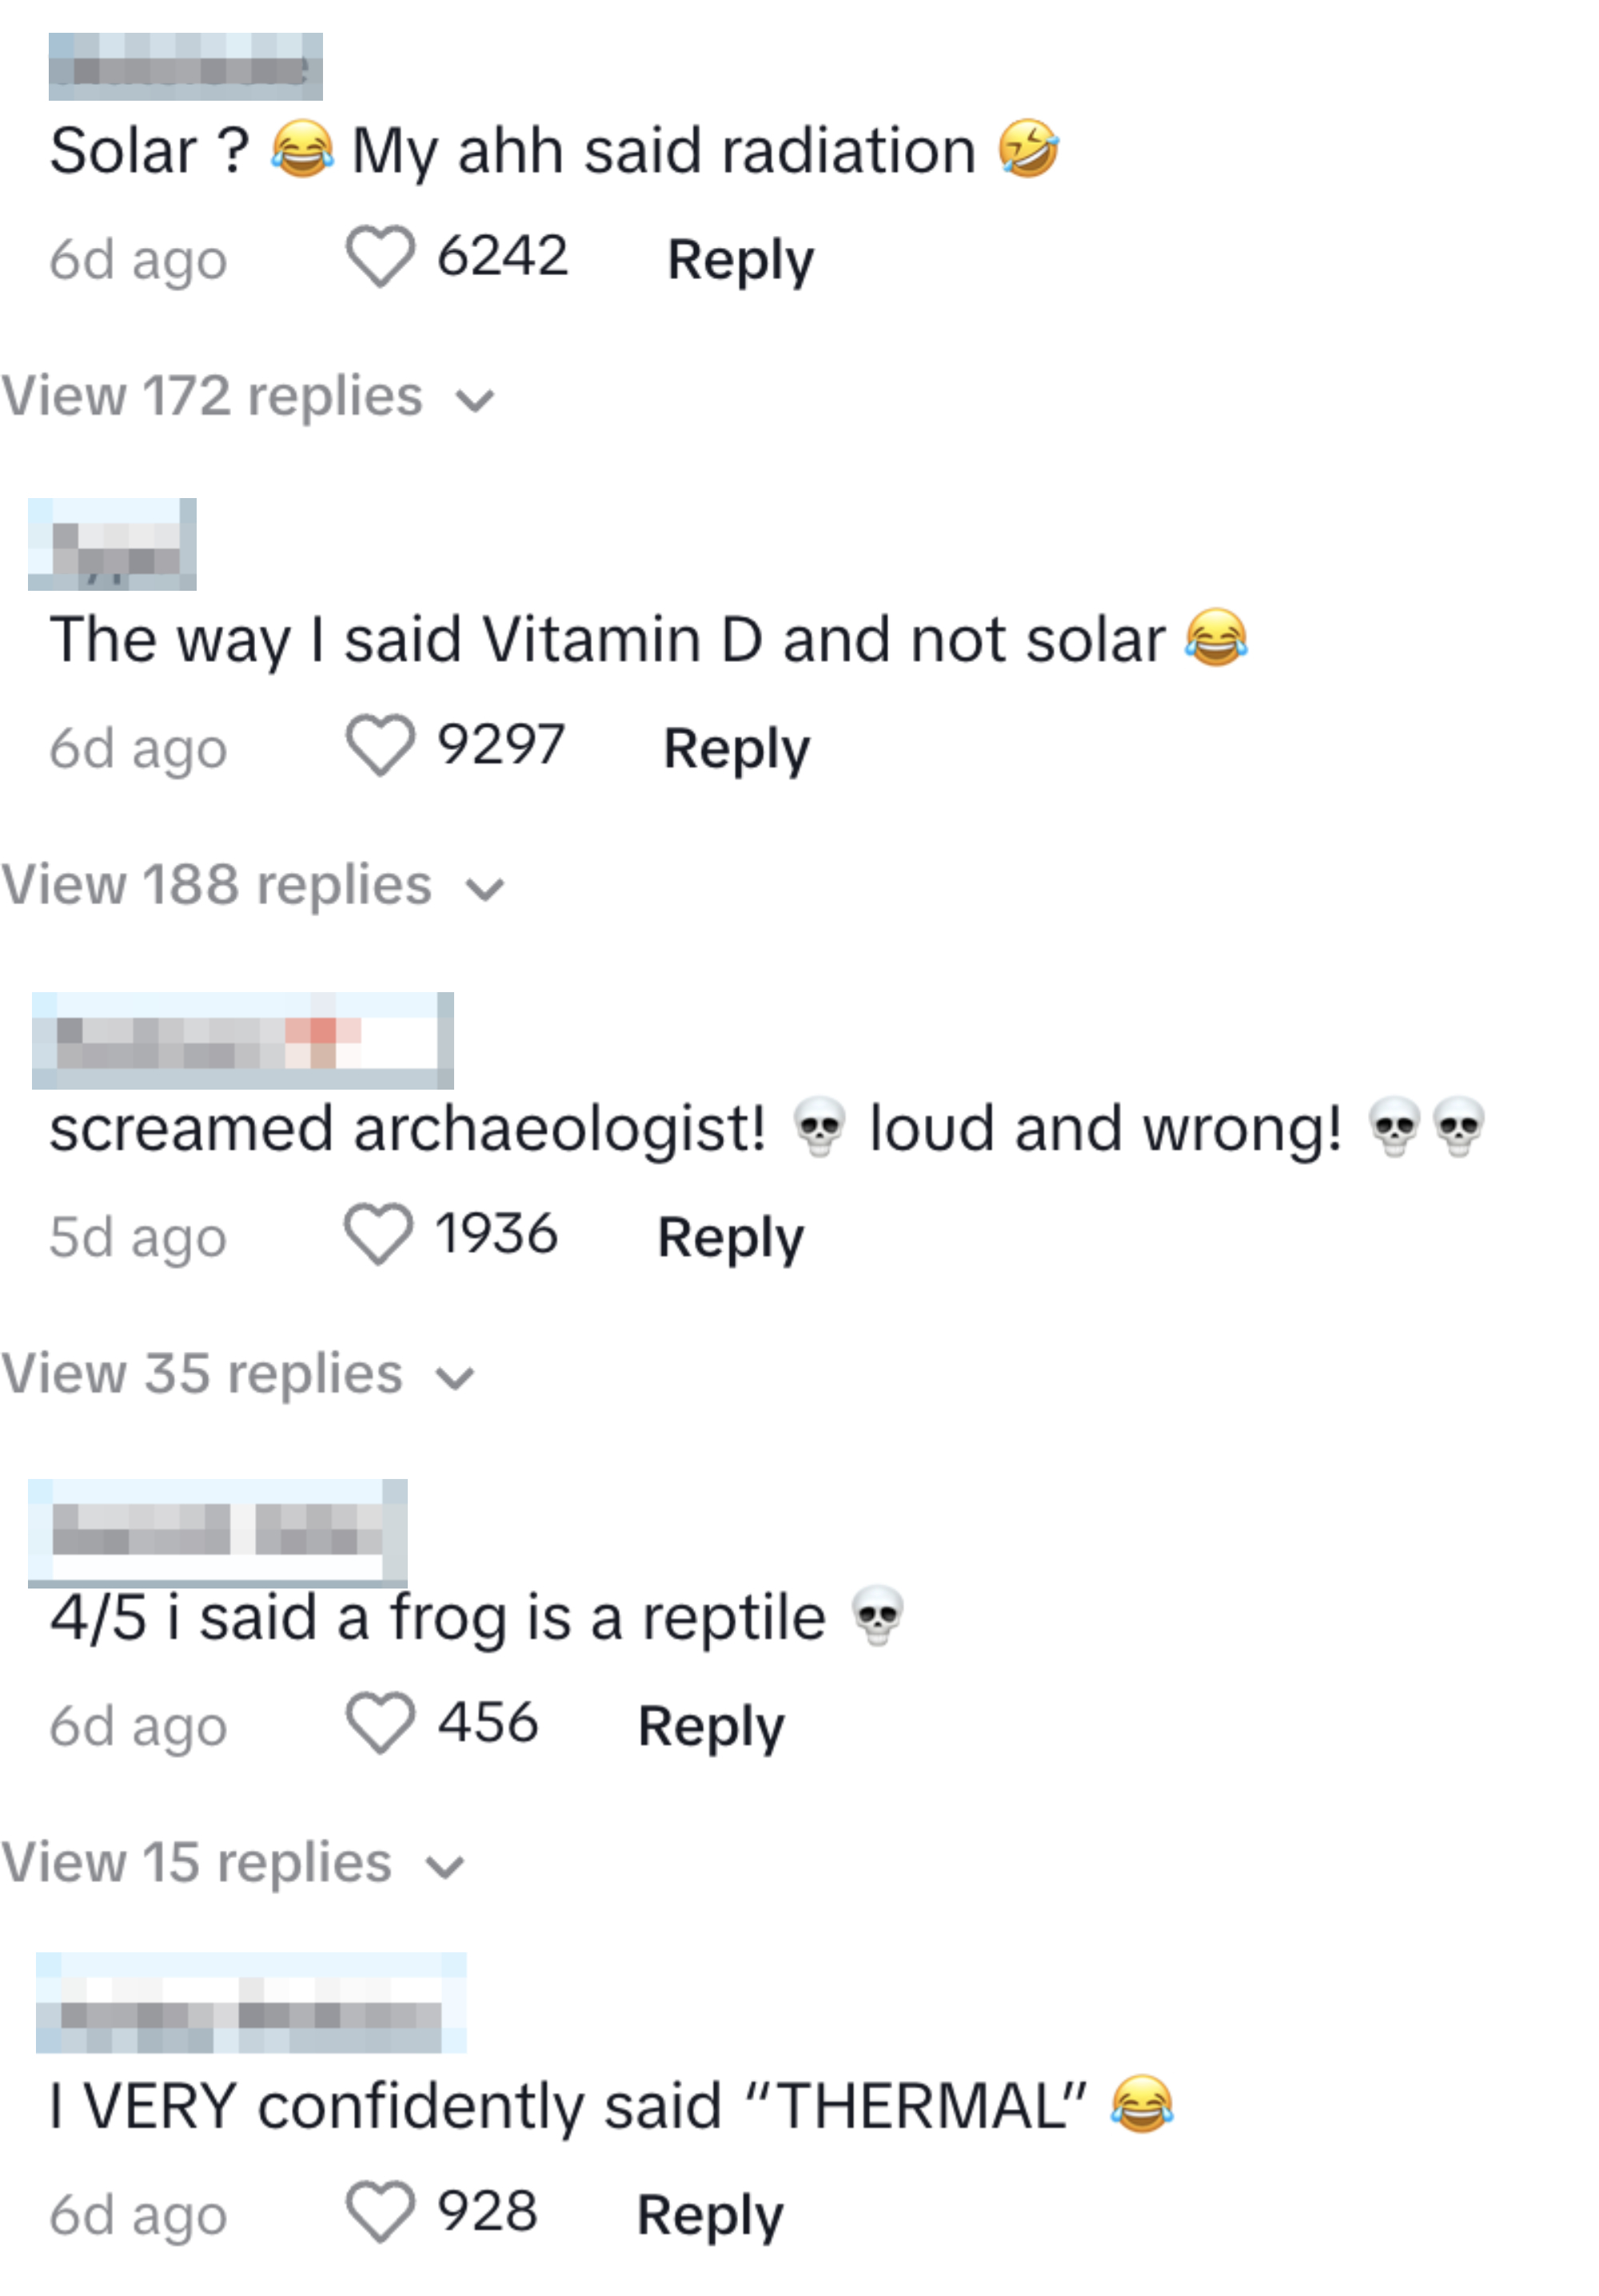 Comments from social media users, including &quot;The way I said vitamin D and not solar,&quot; &quot;i said a frog is a reptile,&quot; and &quot;I VERY confidently said &#x27;THERMAL&#x27;&quot;